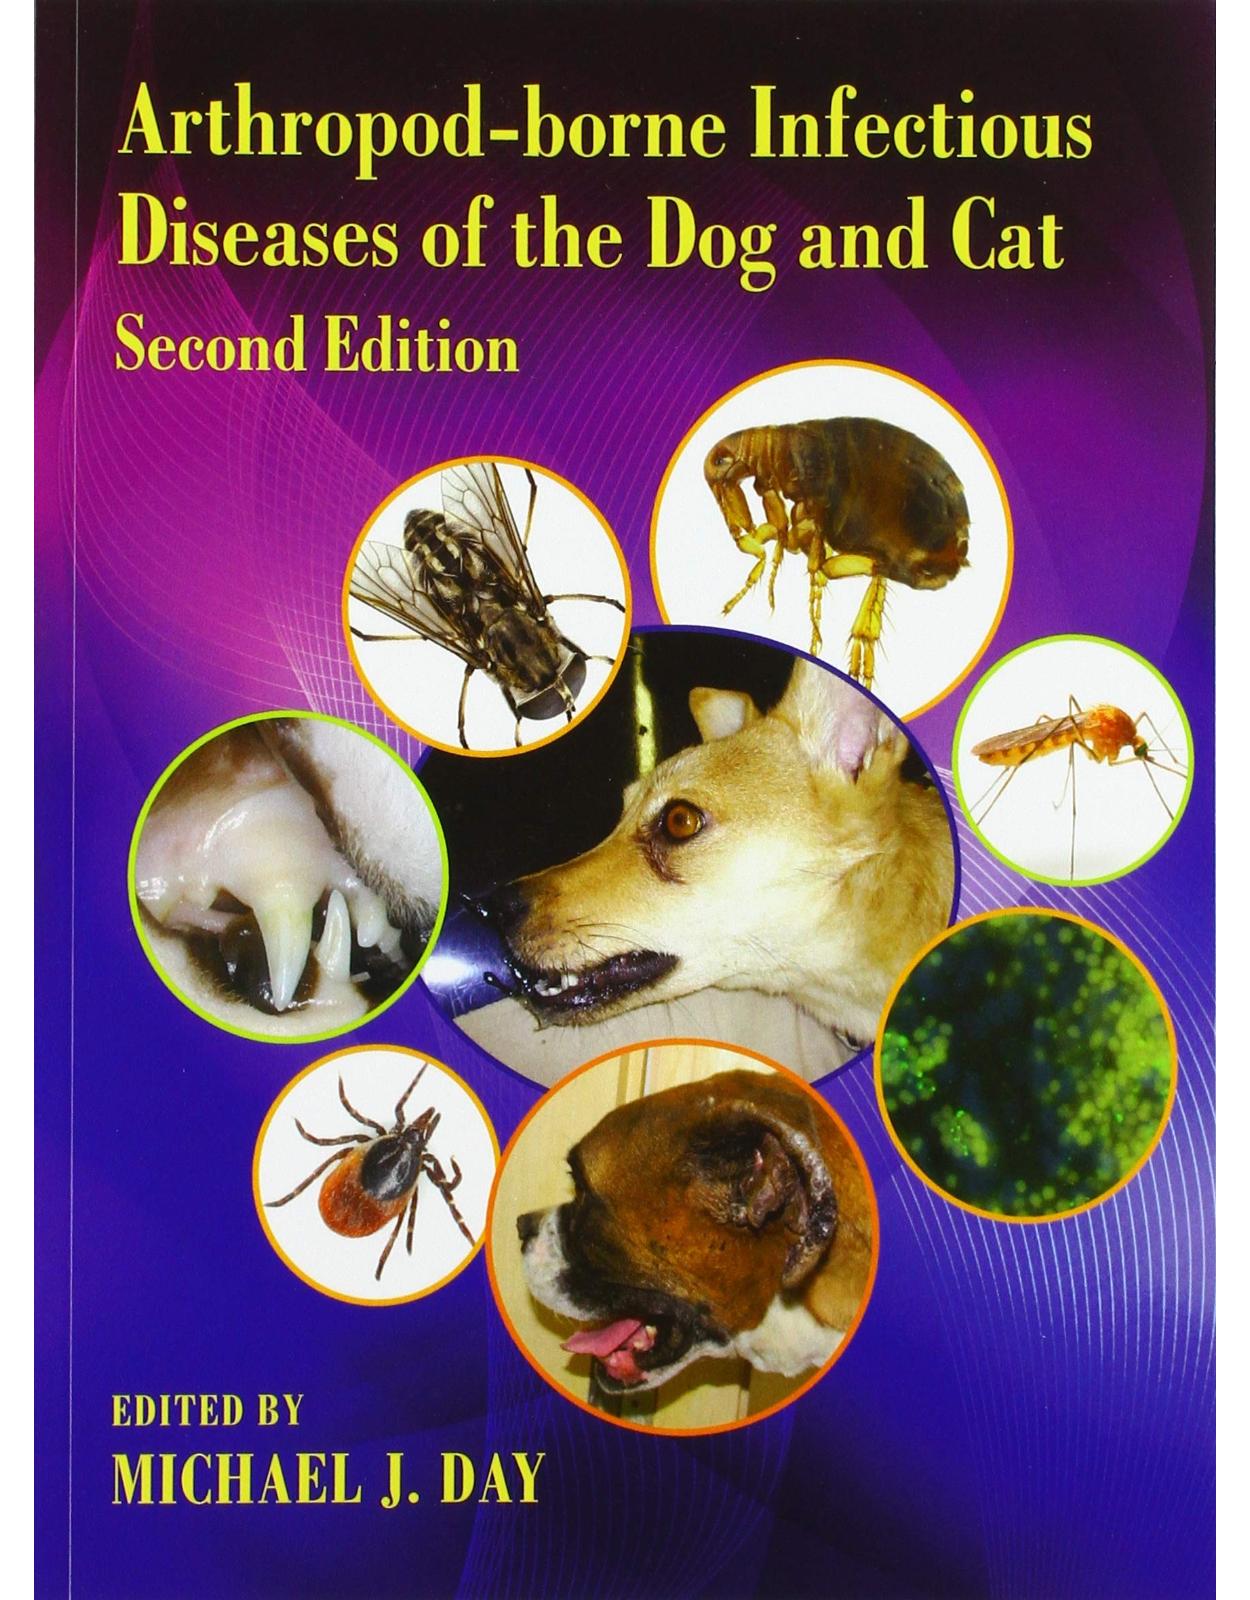 Arthropod-borne Infectious Diseases of the Dog and Cat 